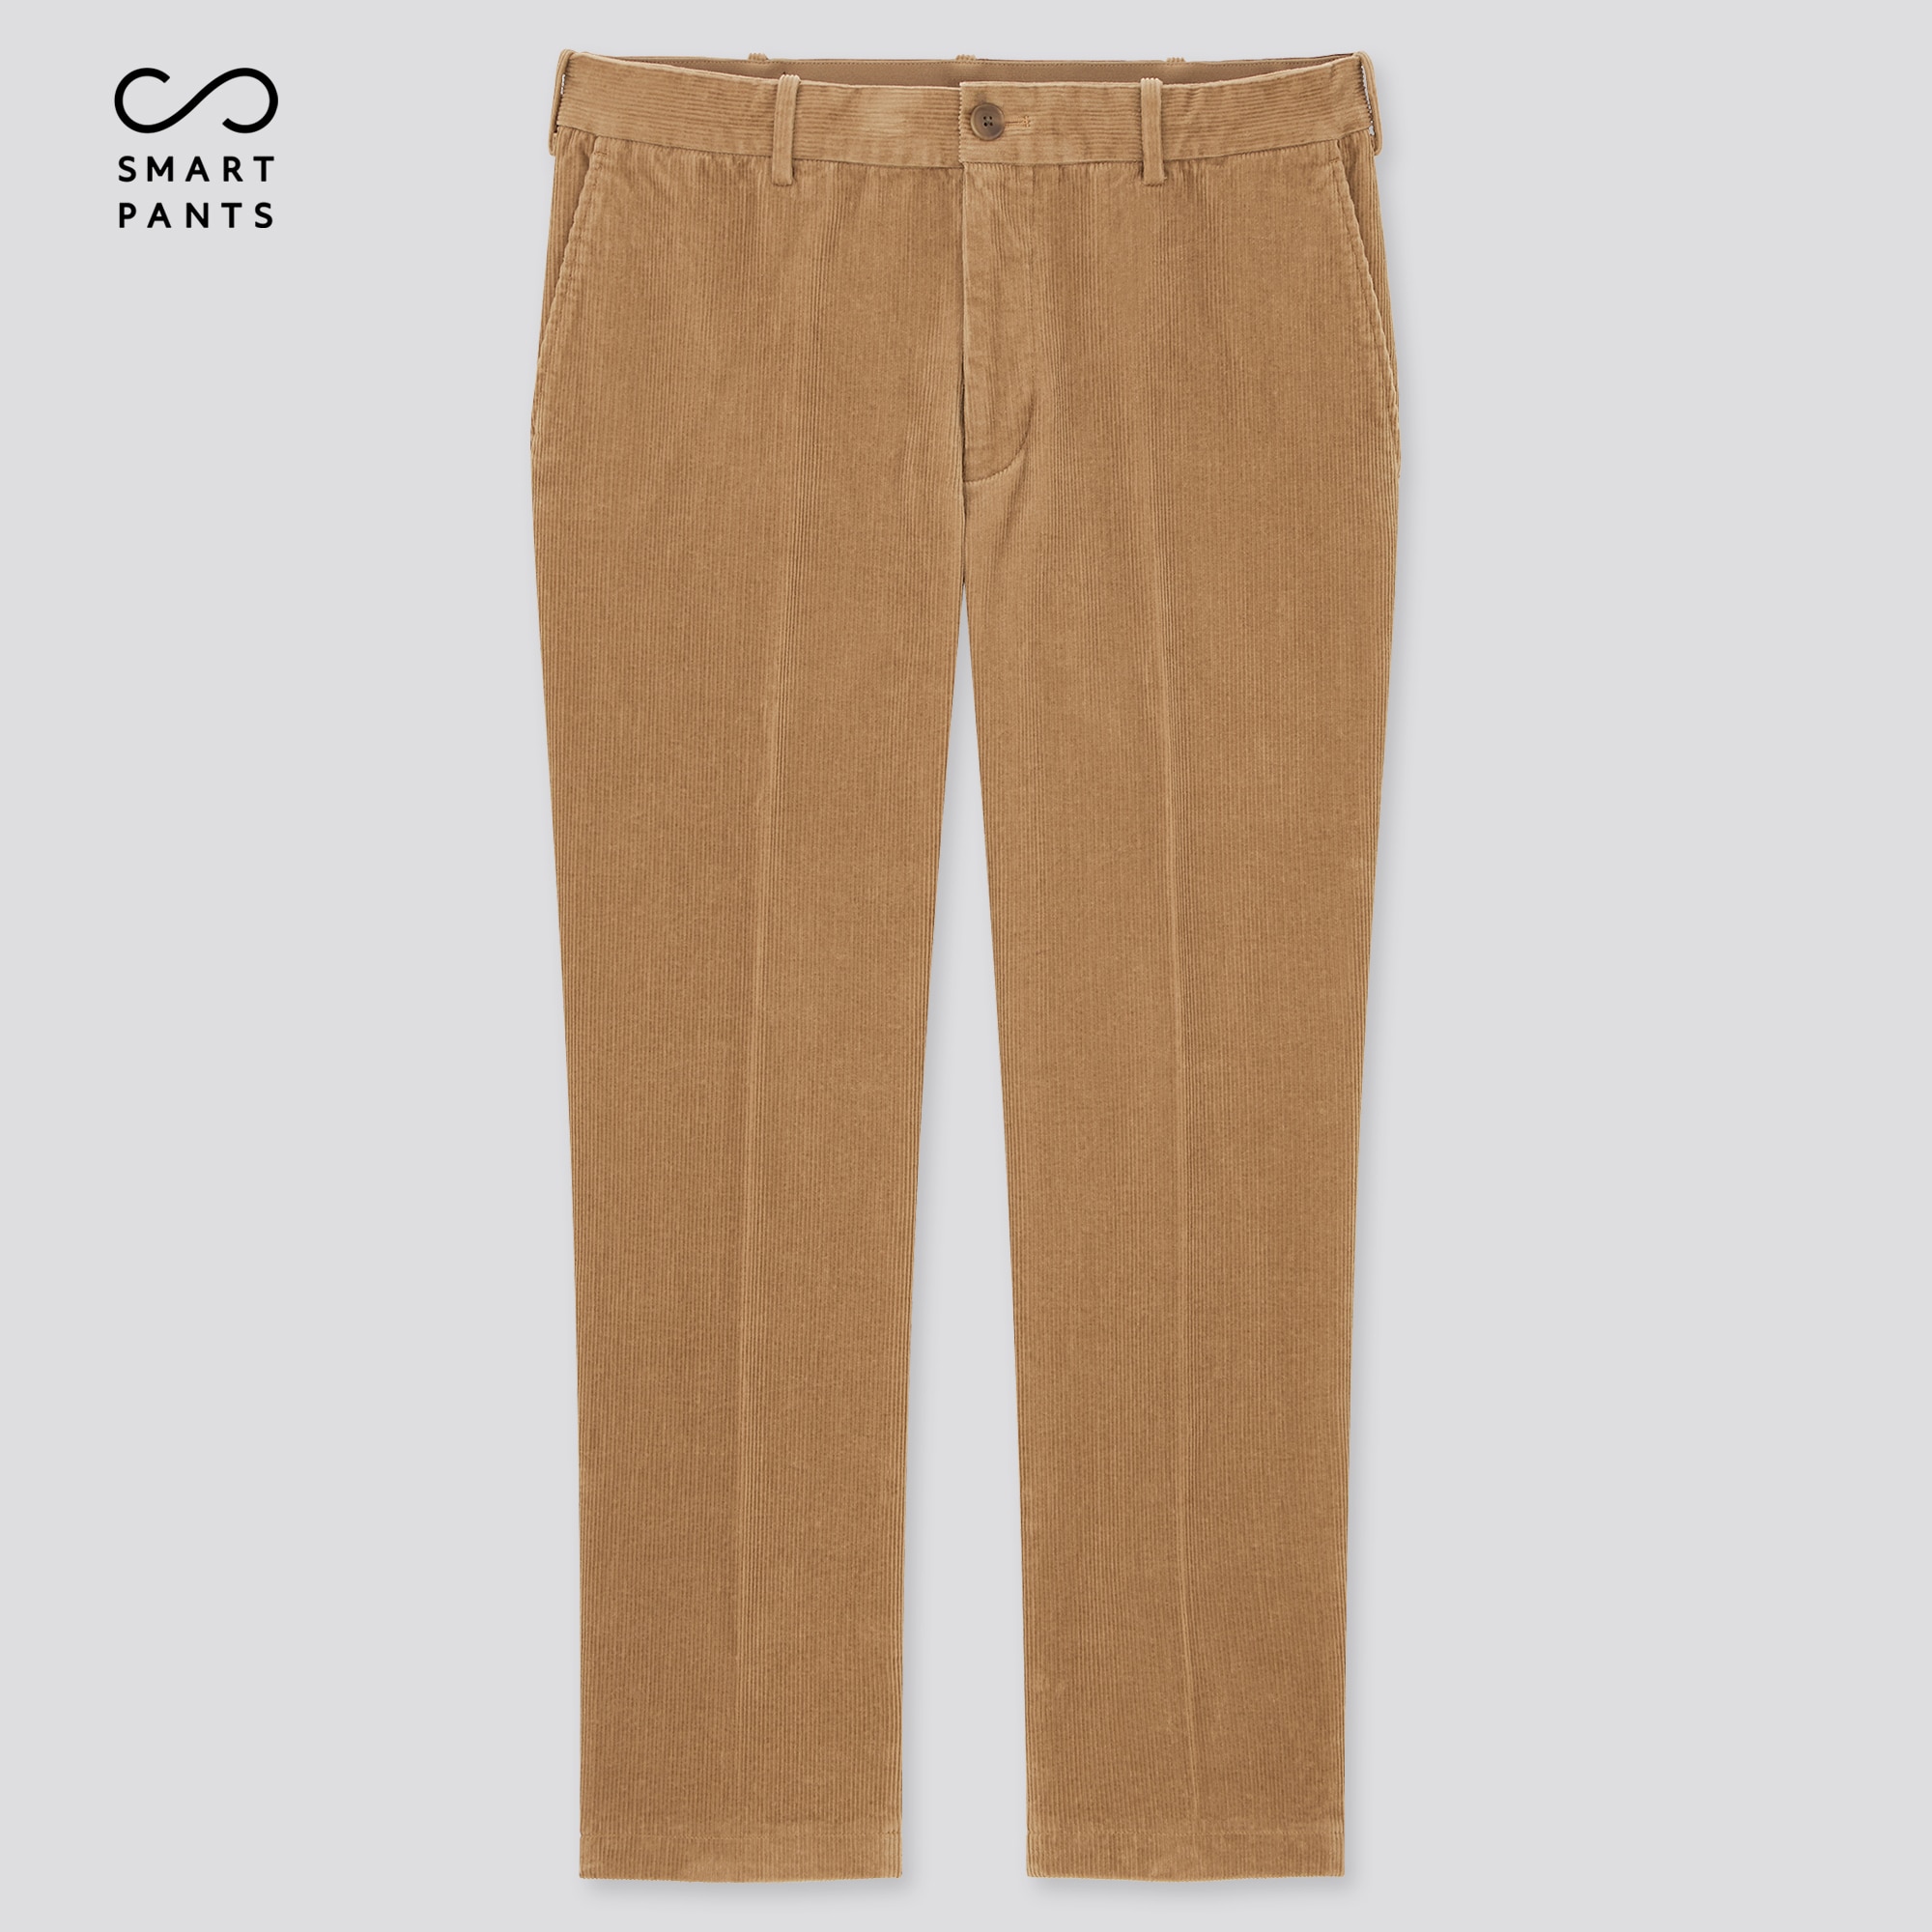 Orvis 1856 Stretch Cords Pants